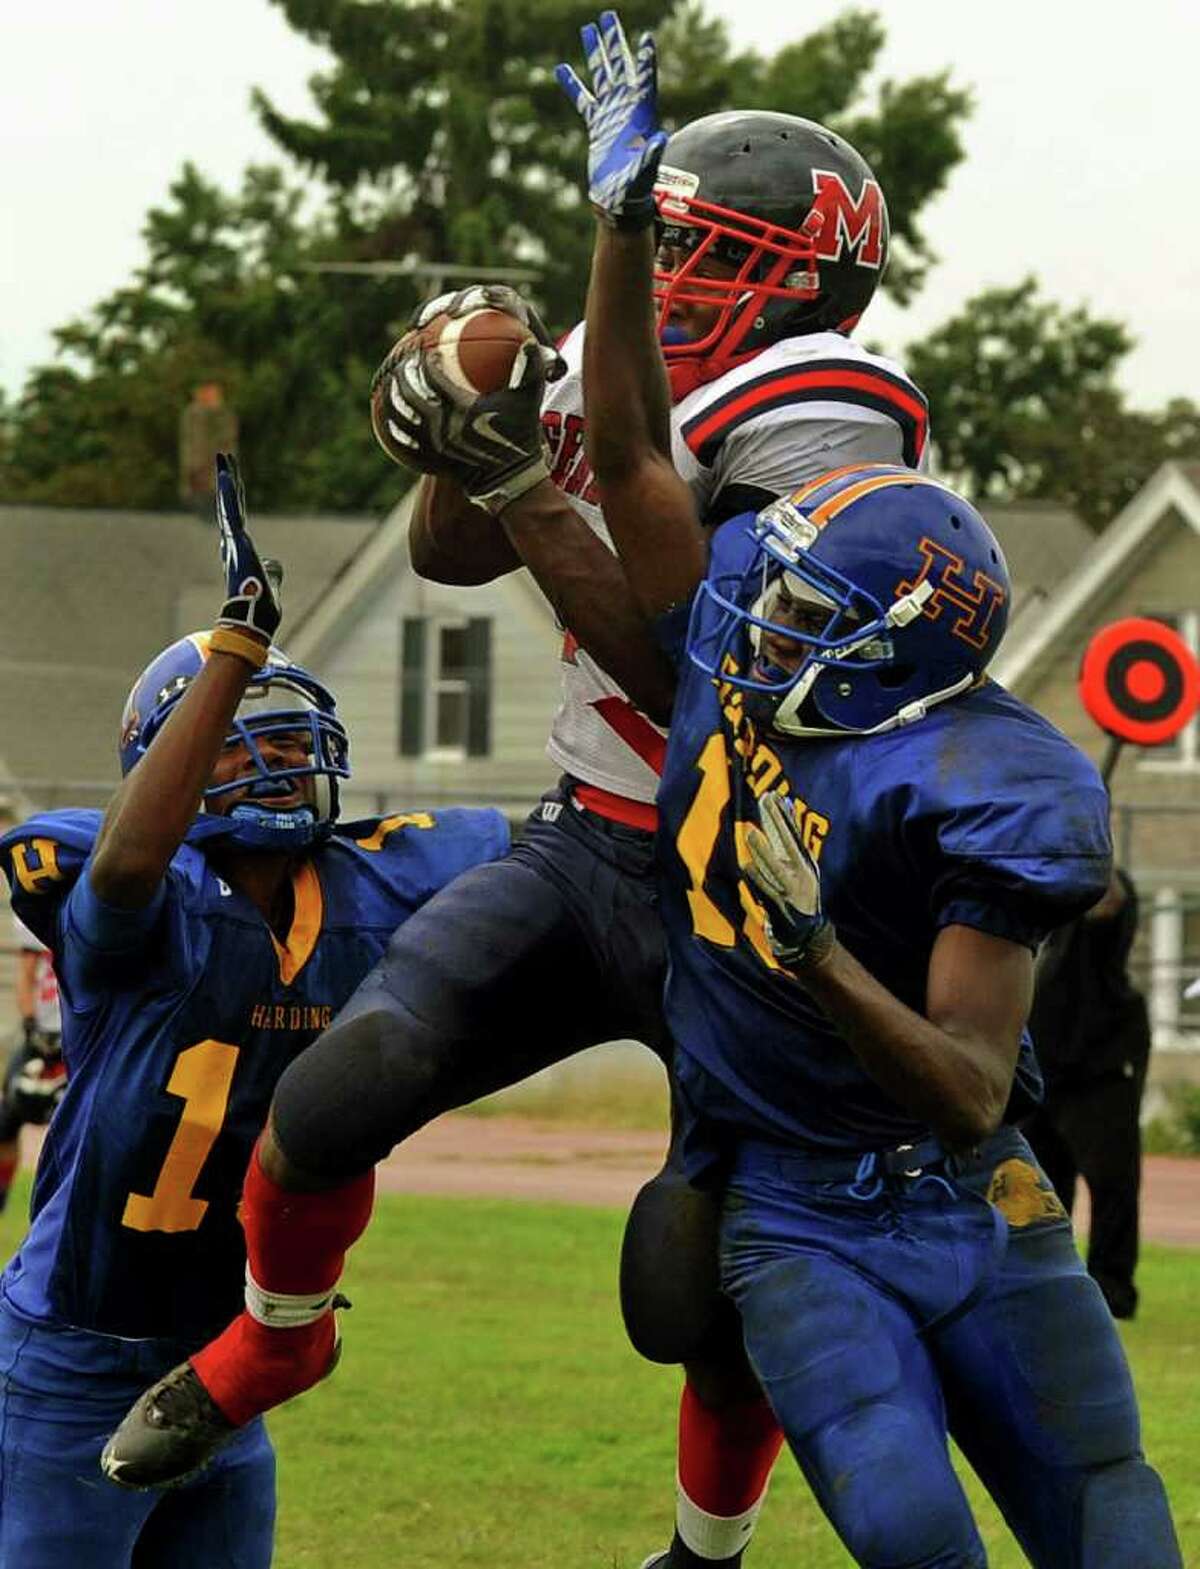 McMahon's #34 Chris Jerome catches the ball in the endzone for a touchdown during boys football action against Harding in Bridgeport, Conn. on Saturday September 24, 2011. Harding players are Jahaad Williams, left, and Antwaine Clark, right.